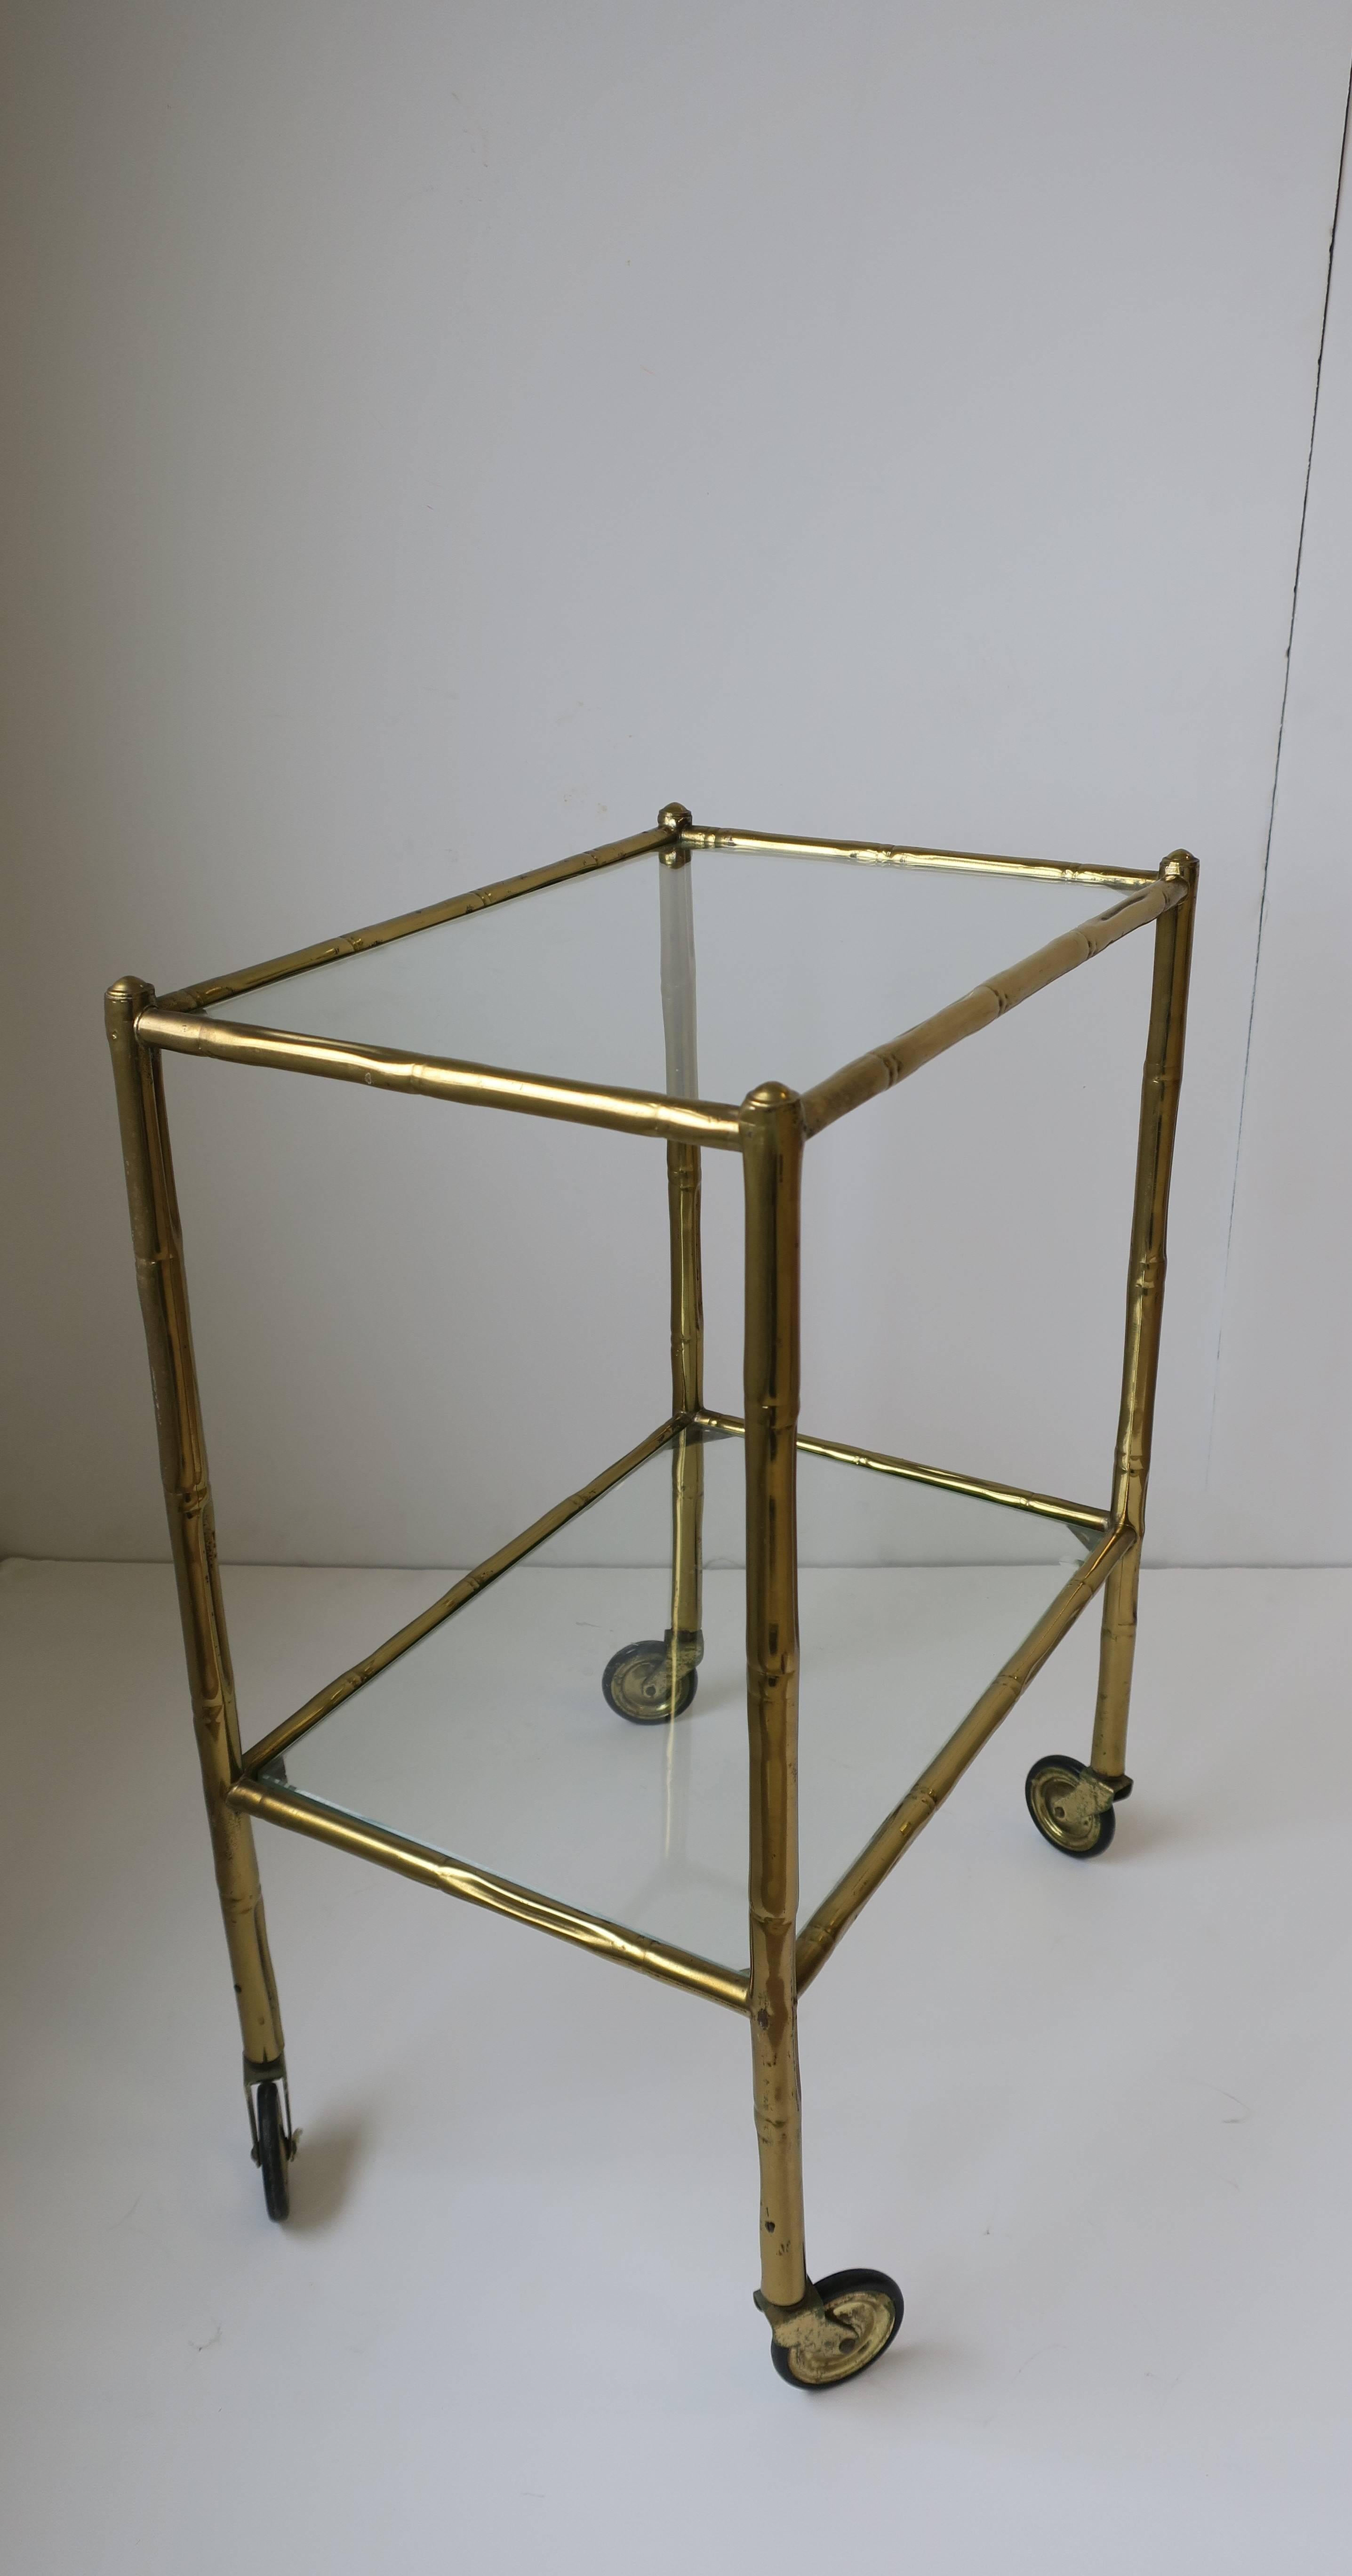 20th Century Vintage Italian Brass and Glass Bar Cart or Side Table, Italy